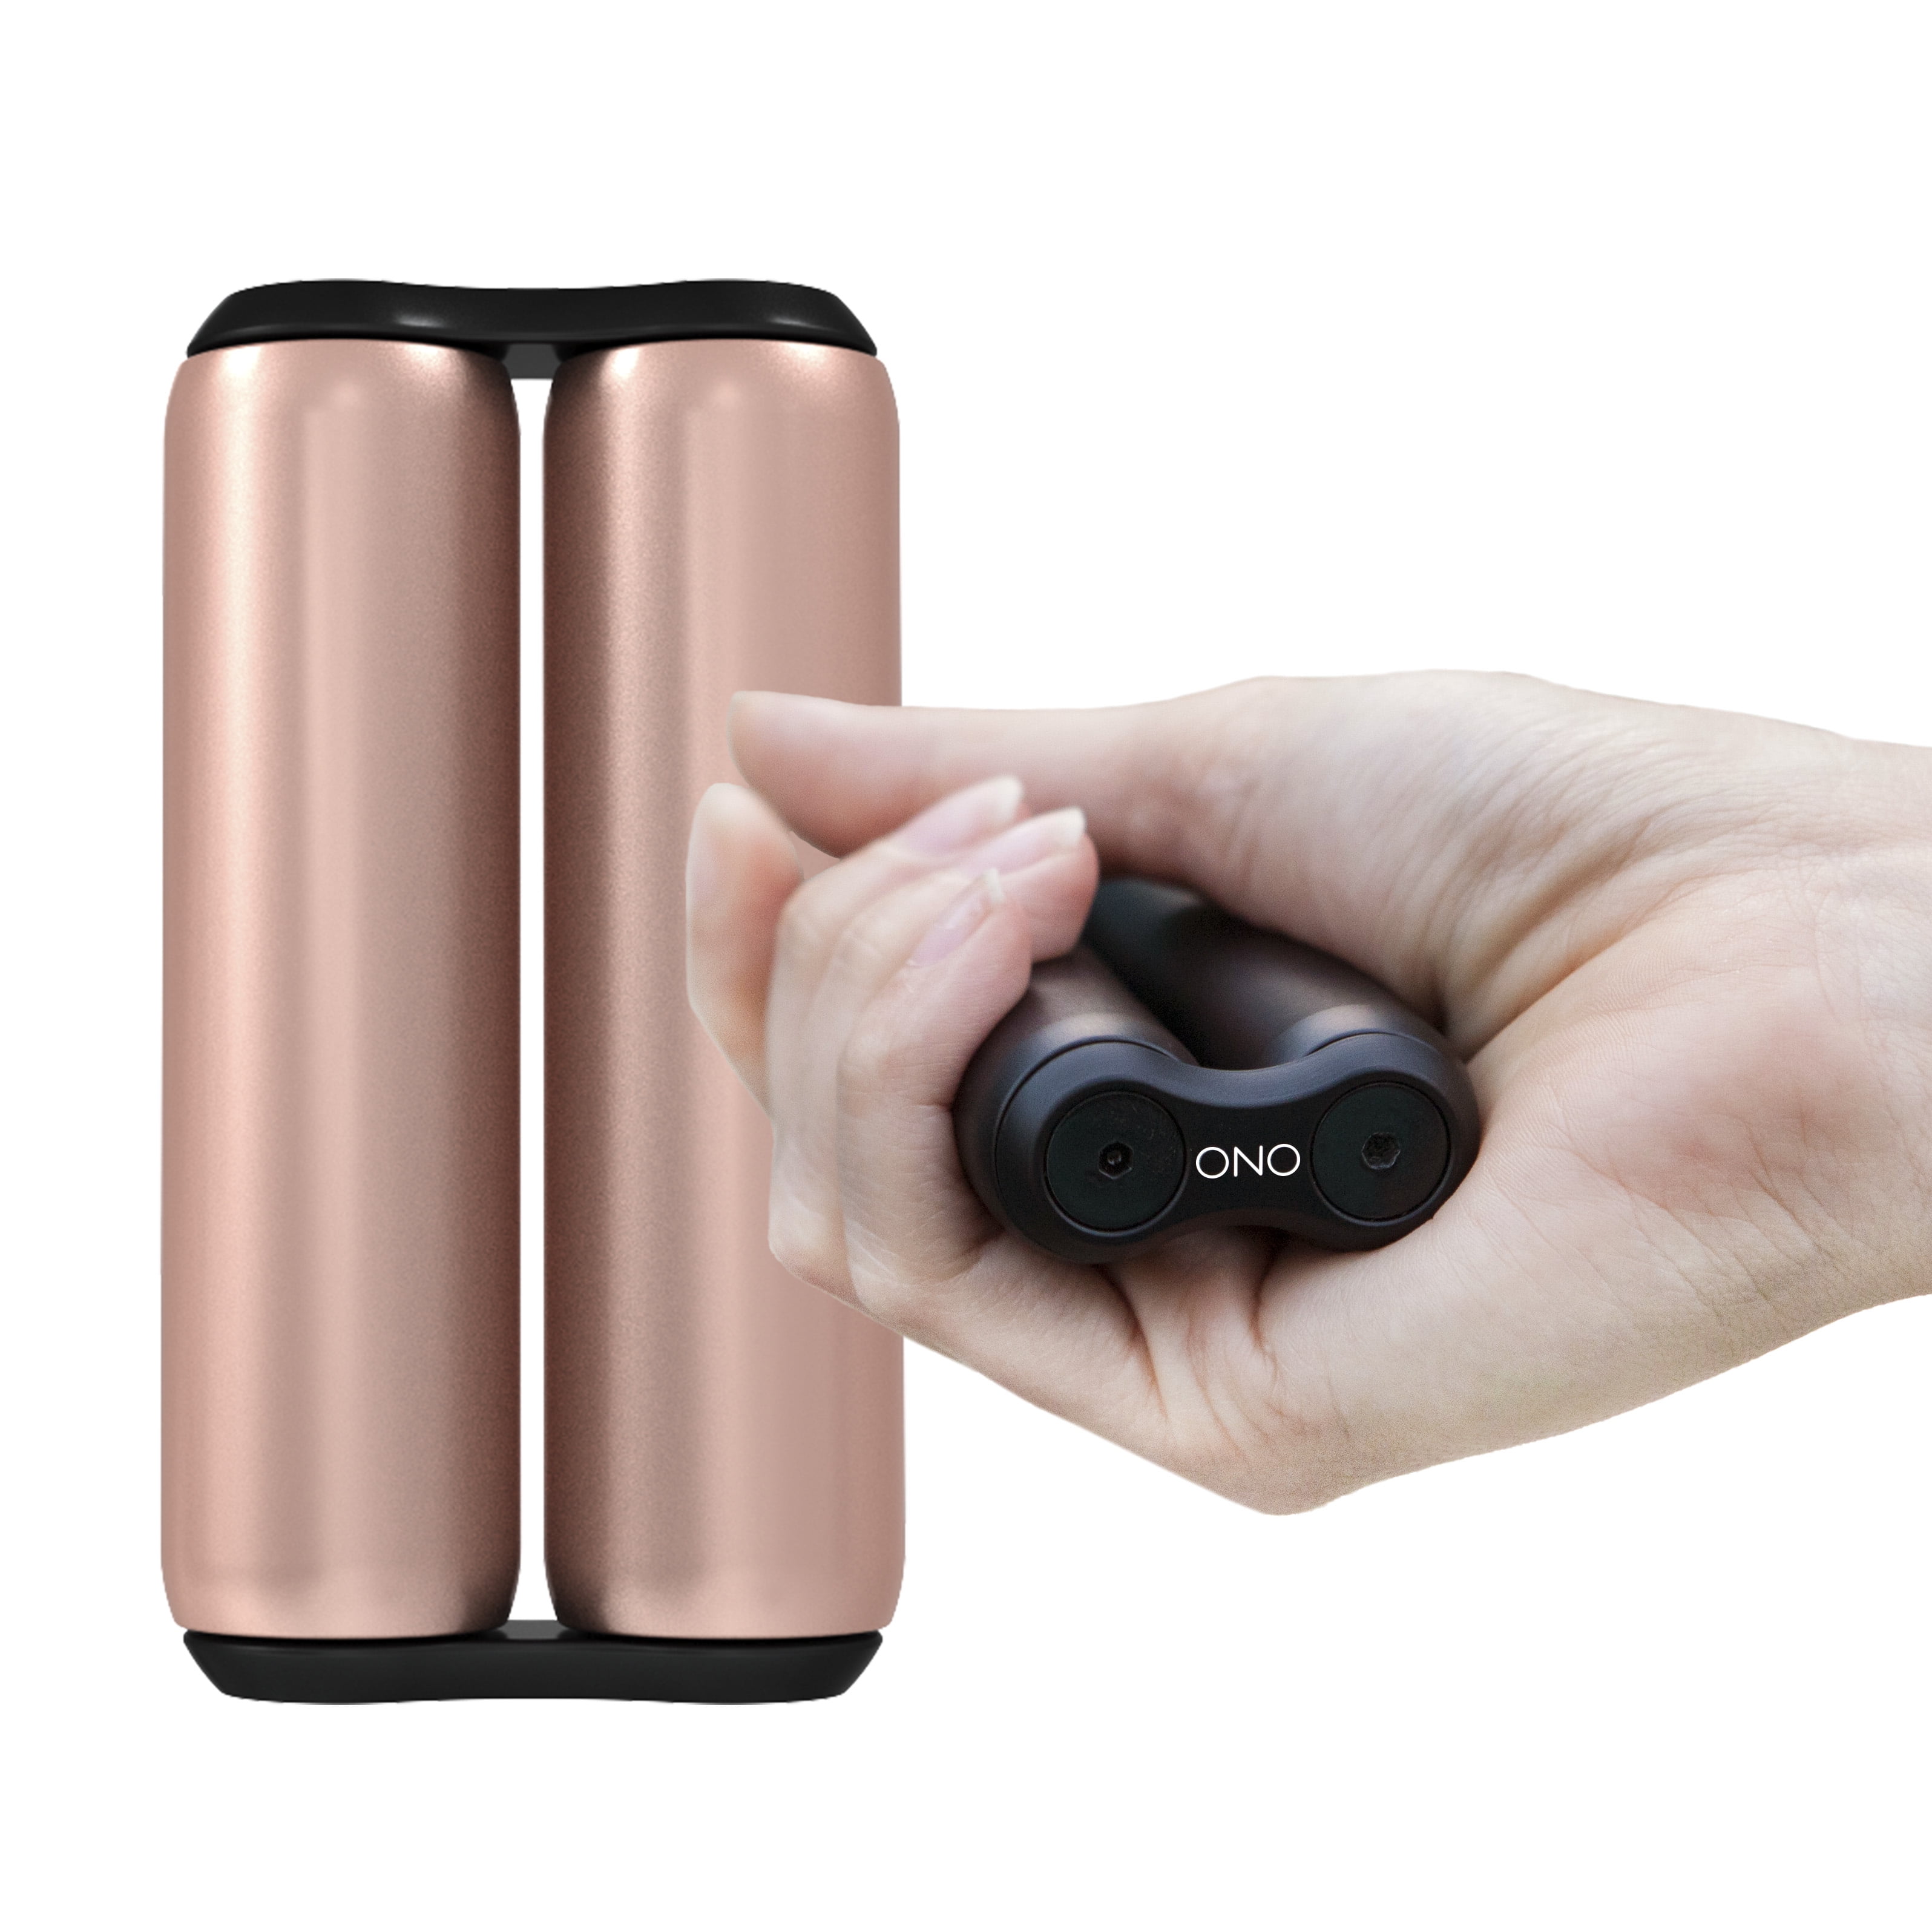 Handheld Fidget Toy for Adults The Original Rose Gold ONO Roller - Compact Anxiety Help Relieve Stress Tension Portable Design Clarity Promotes Focus 